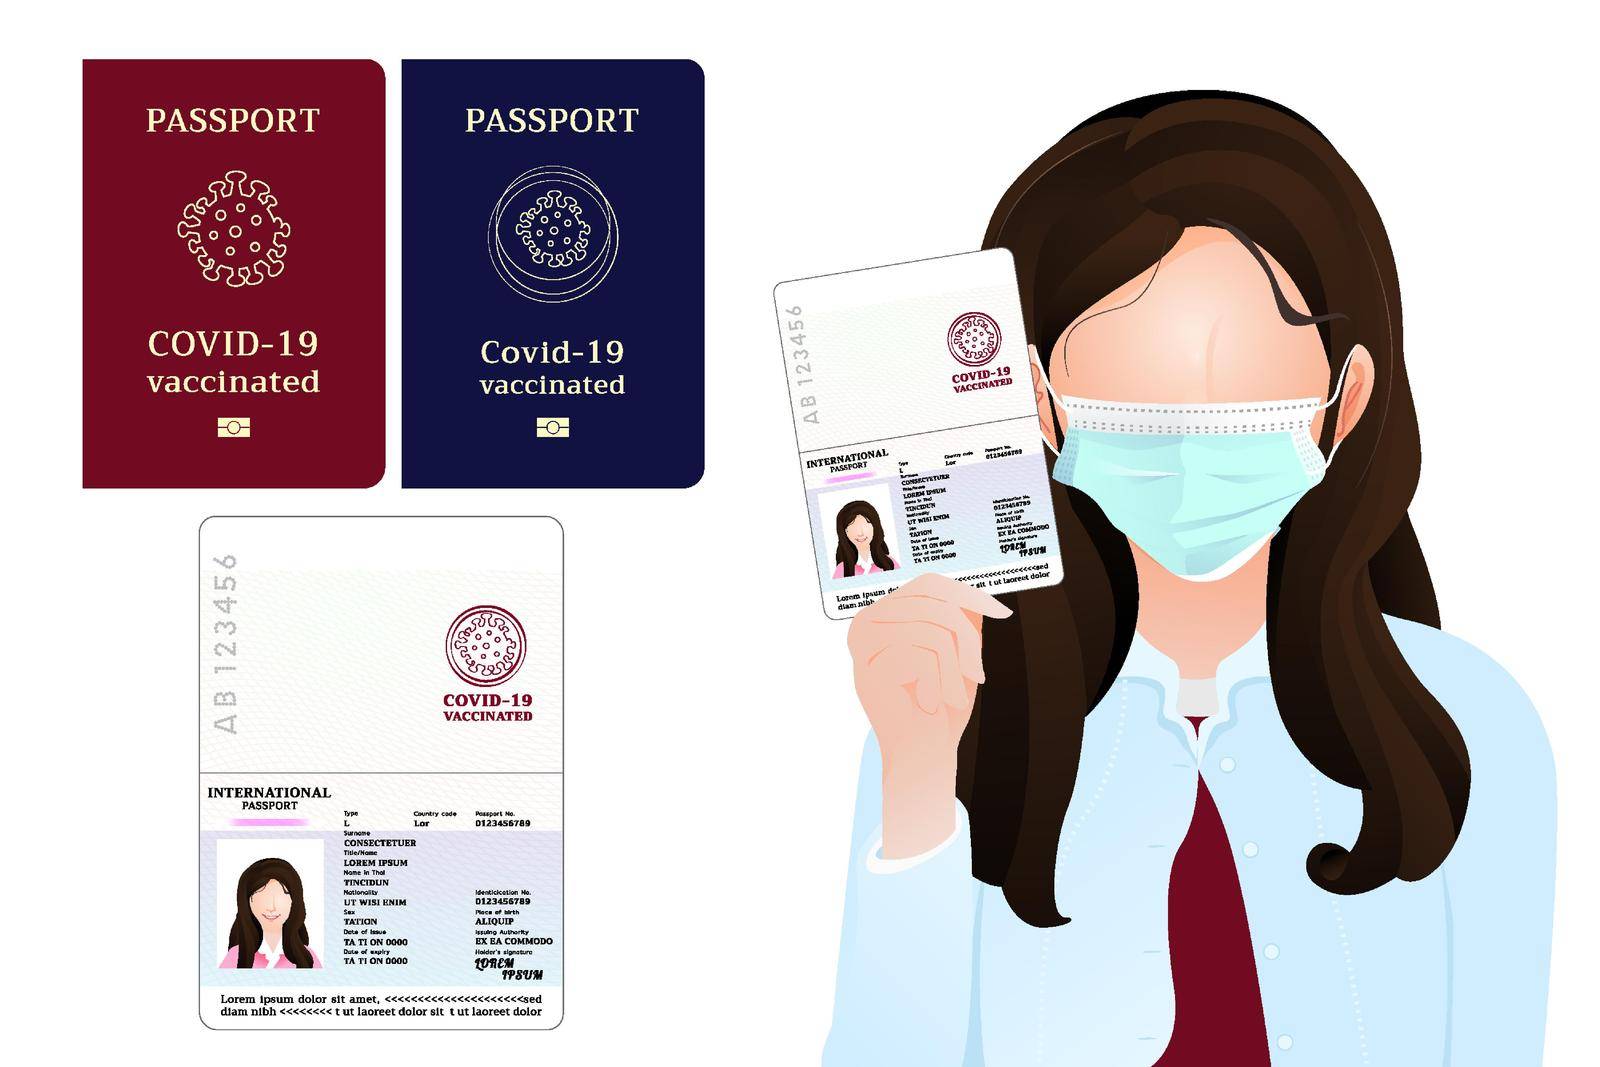 Passport for whom have covid-19 vaccine injection, coronavirus vaccinated passport for travelers or businessmans identifield themselves,the girl shown passpor tvector illustration on white background. by Boingzstudio